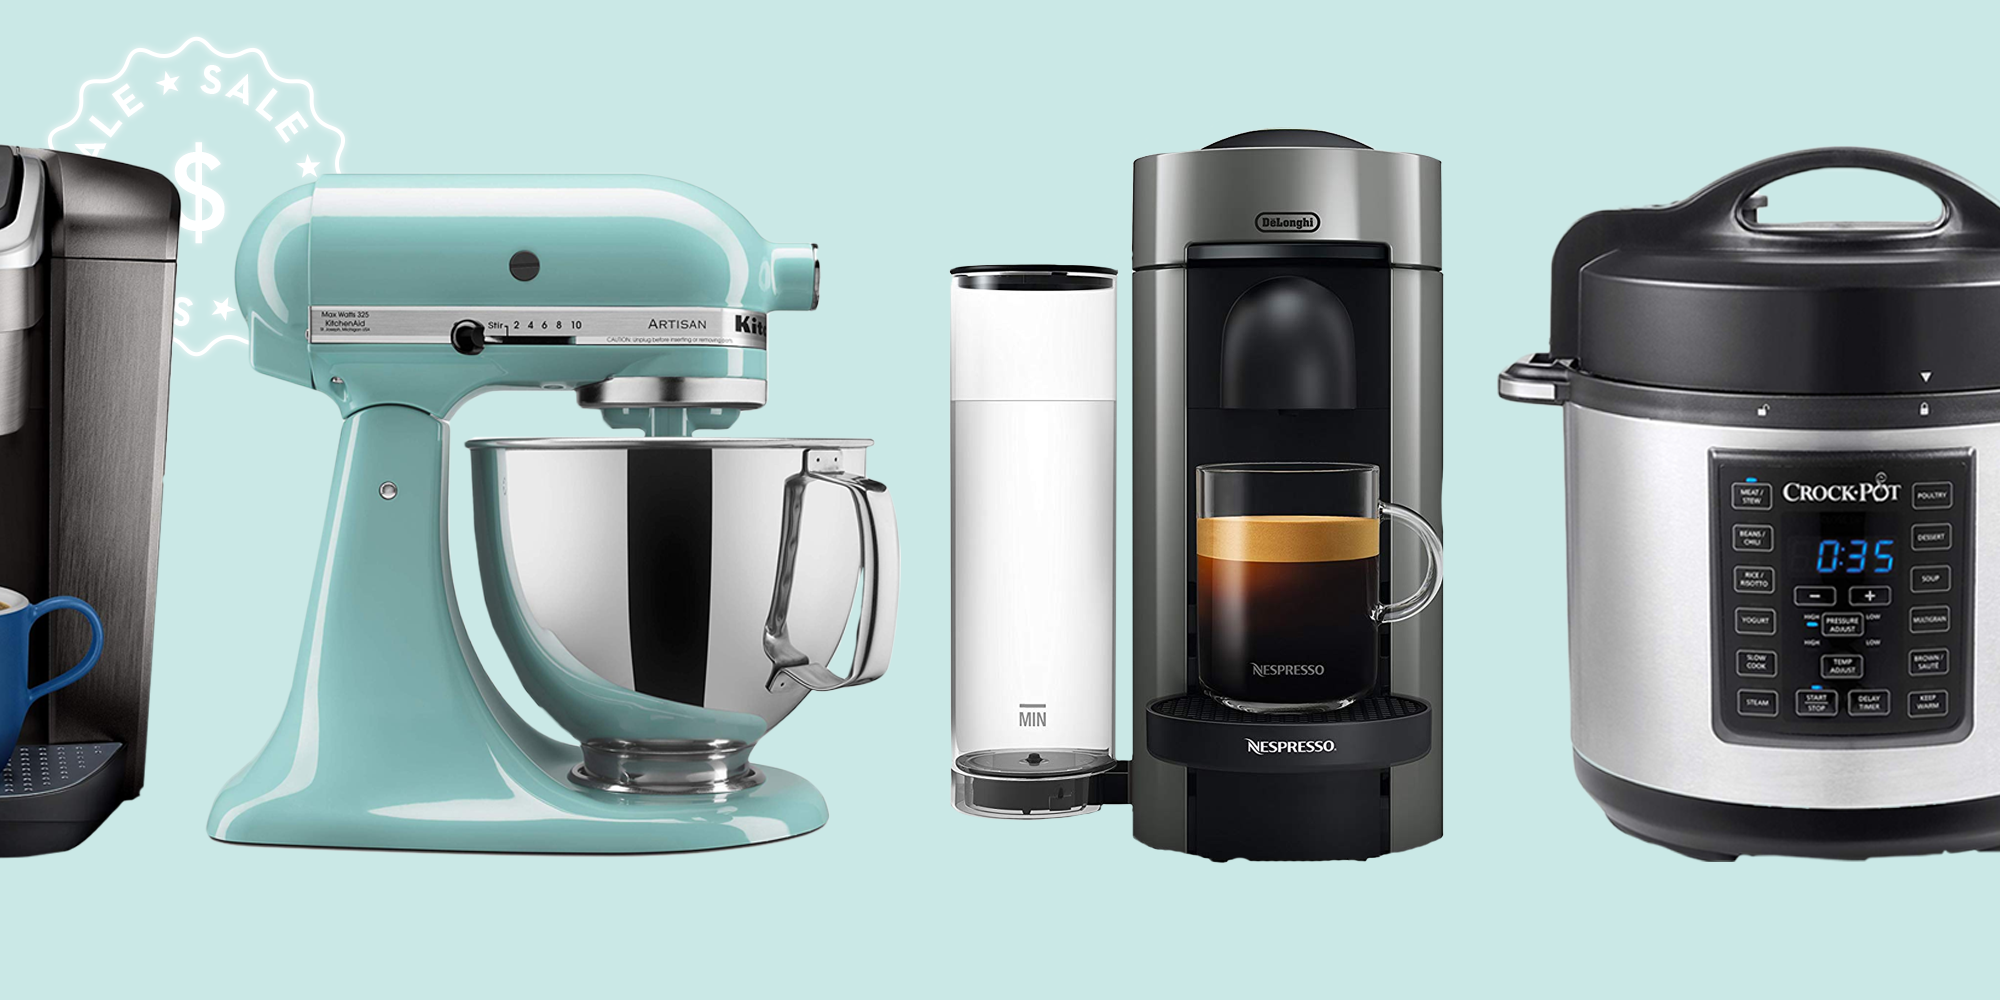 best black friday appliance sales of 2019